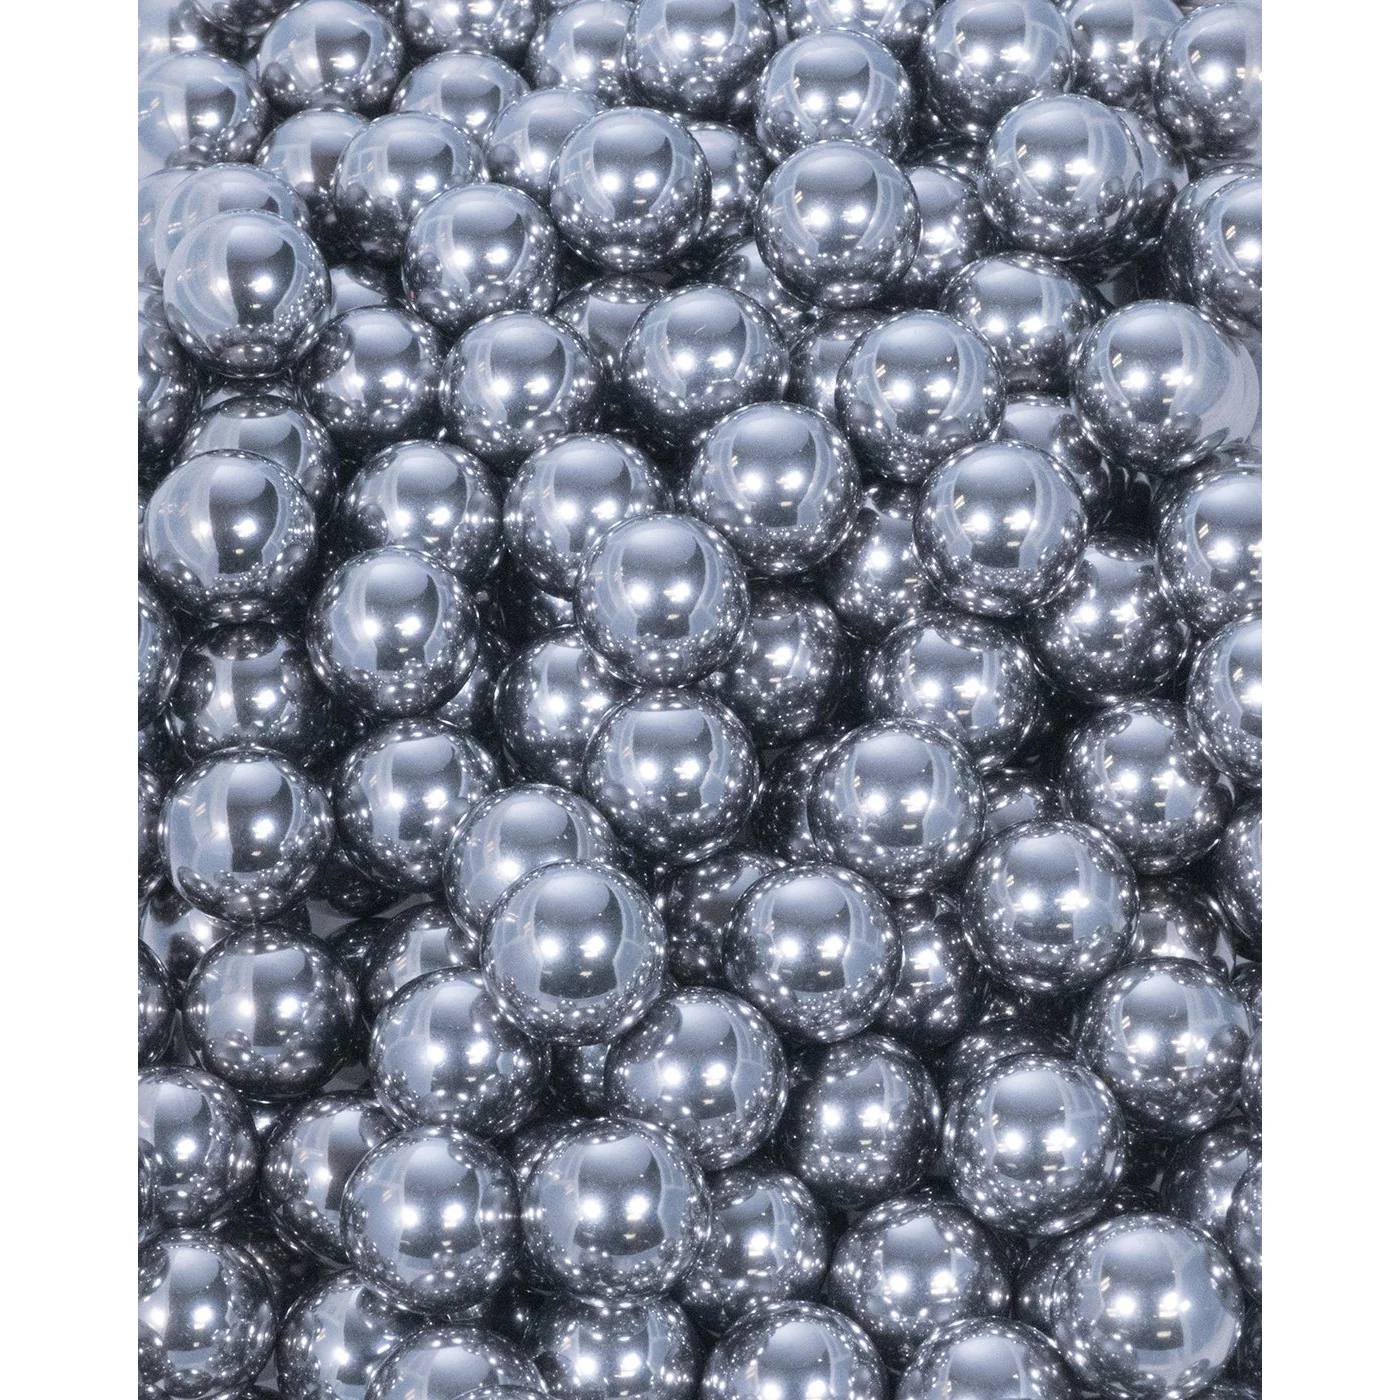 304 Stainless Steel Ball Bearings Packs Questions & Answers